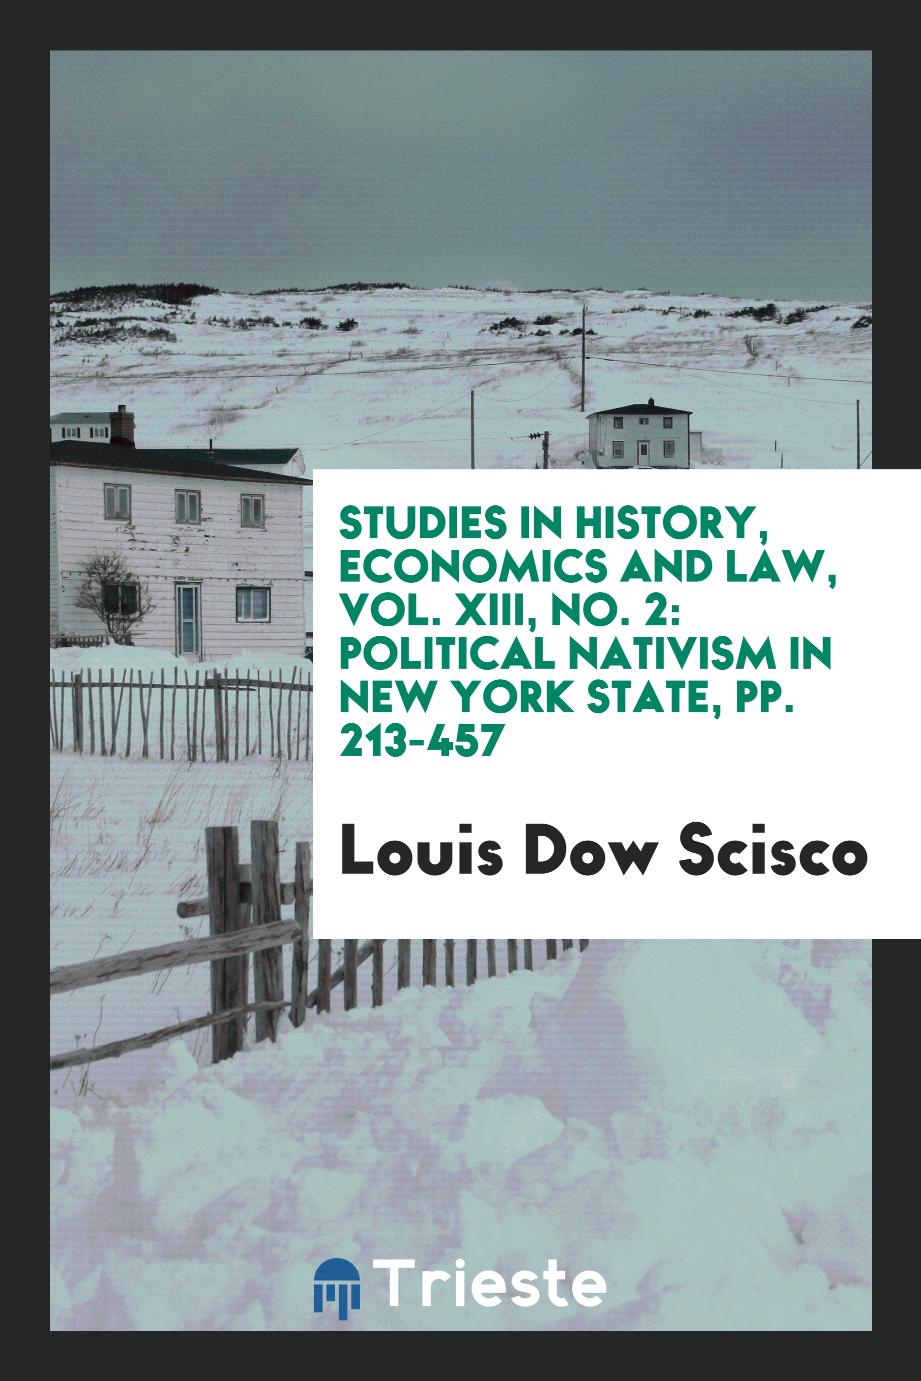 Studies in history, economics and law, Vol. XIII, No. 2: Political nativism in New York State, pp. 213-457